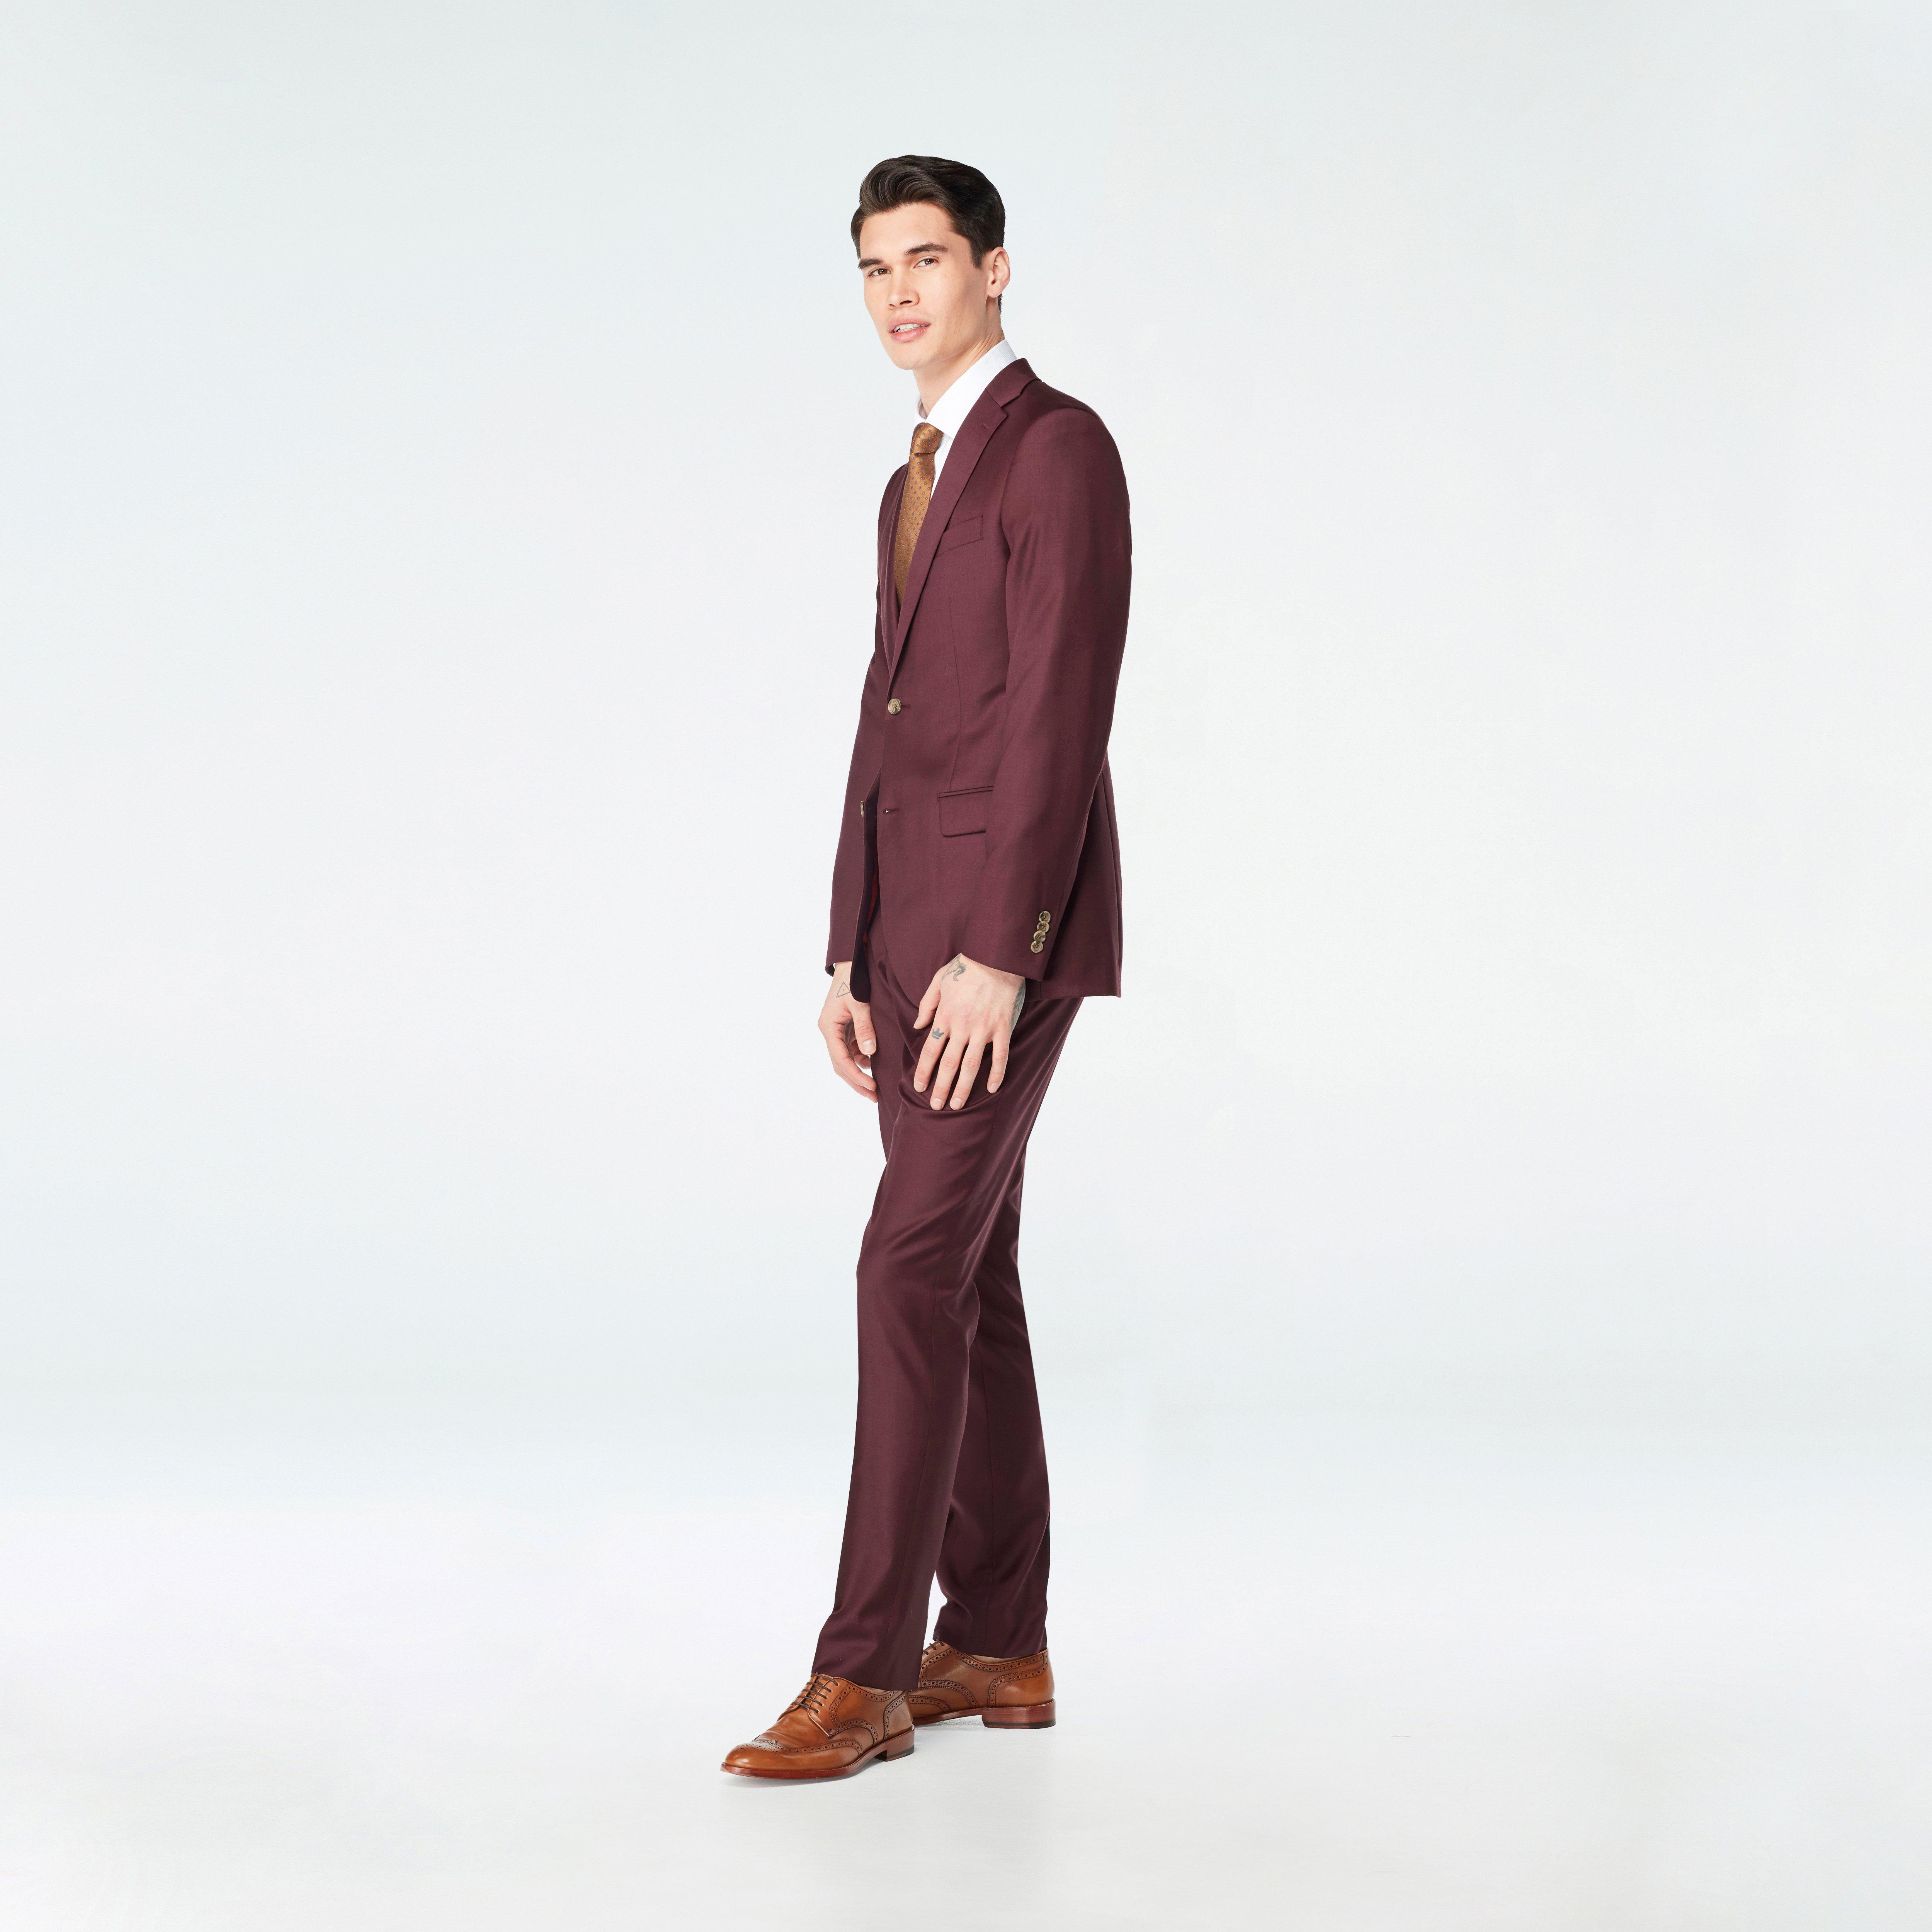 Men's Suits | Custom Made To Measure Suits | INDOCHINO